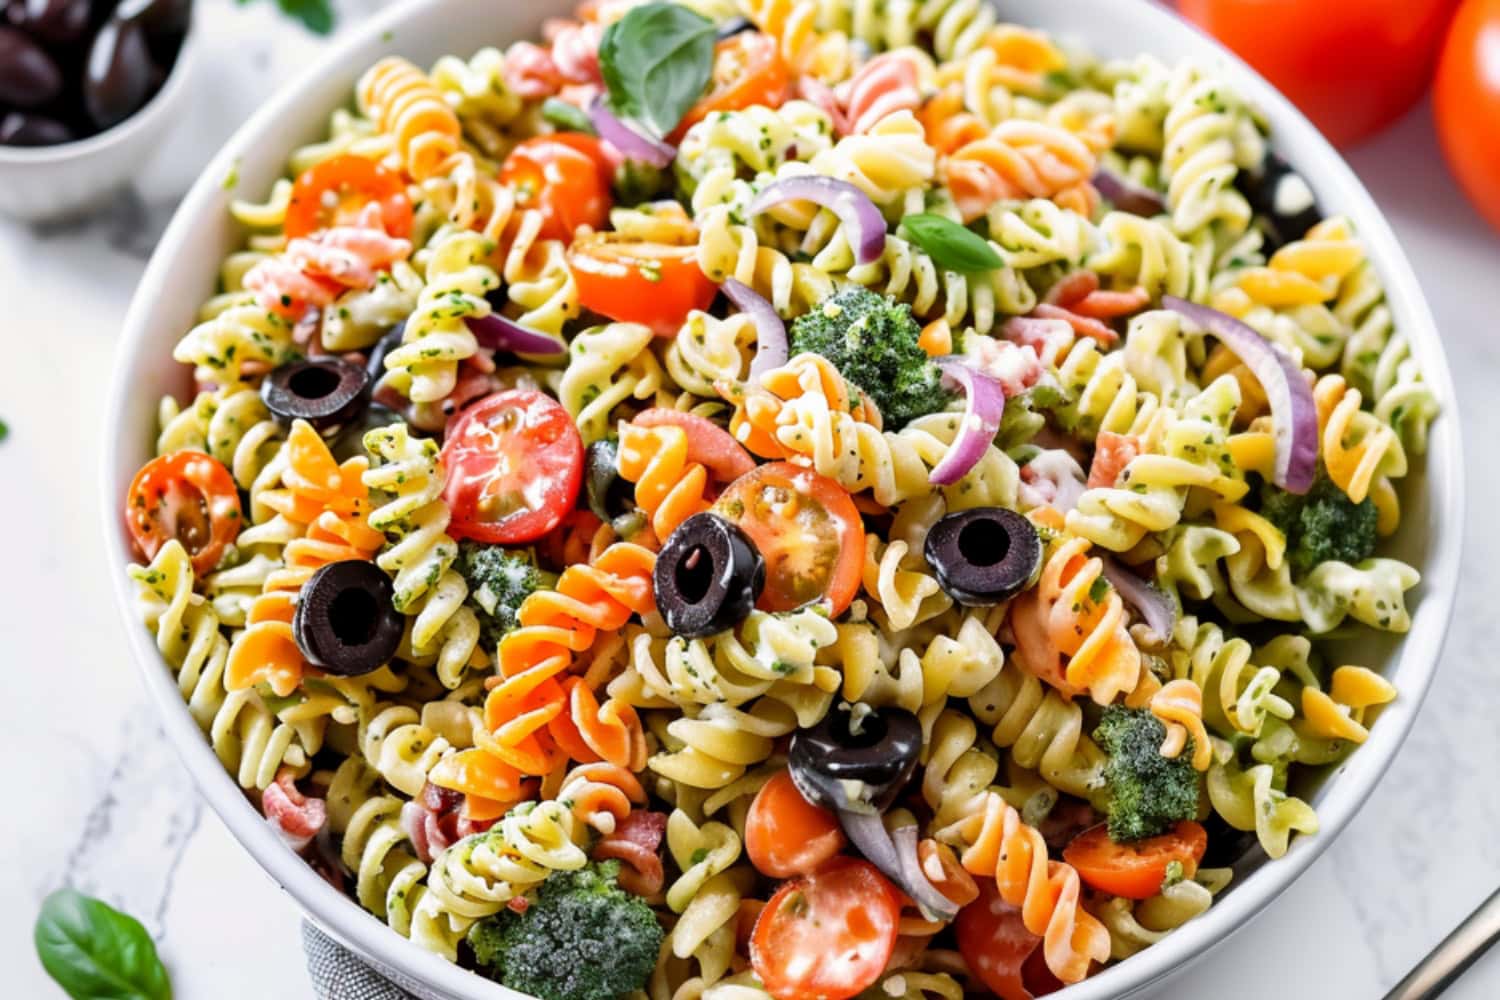 Tri color pasta salad served in a white bowl made with Tri color rotini pasta salad with creamy dressing, rotini pasta with fresh herbs, pesto, veggies, and cheese